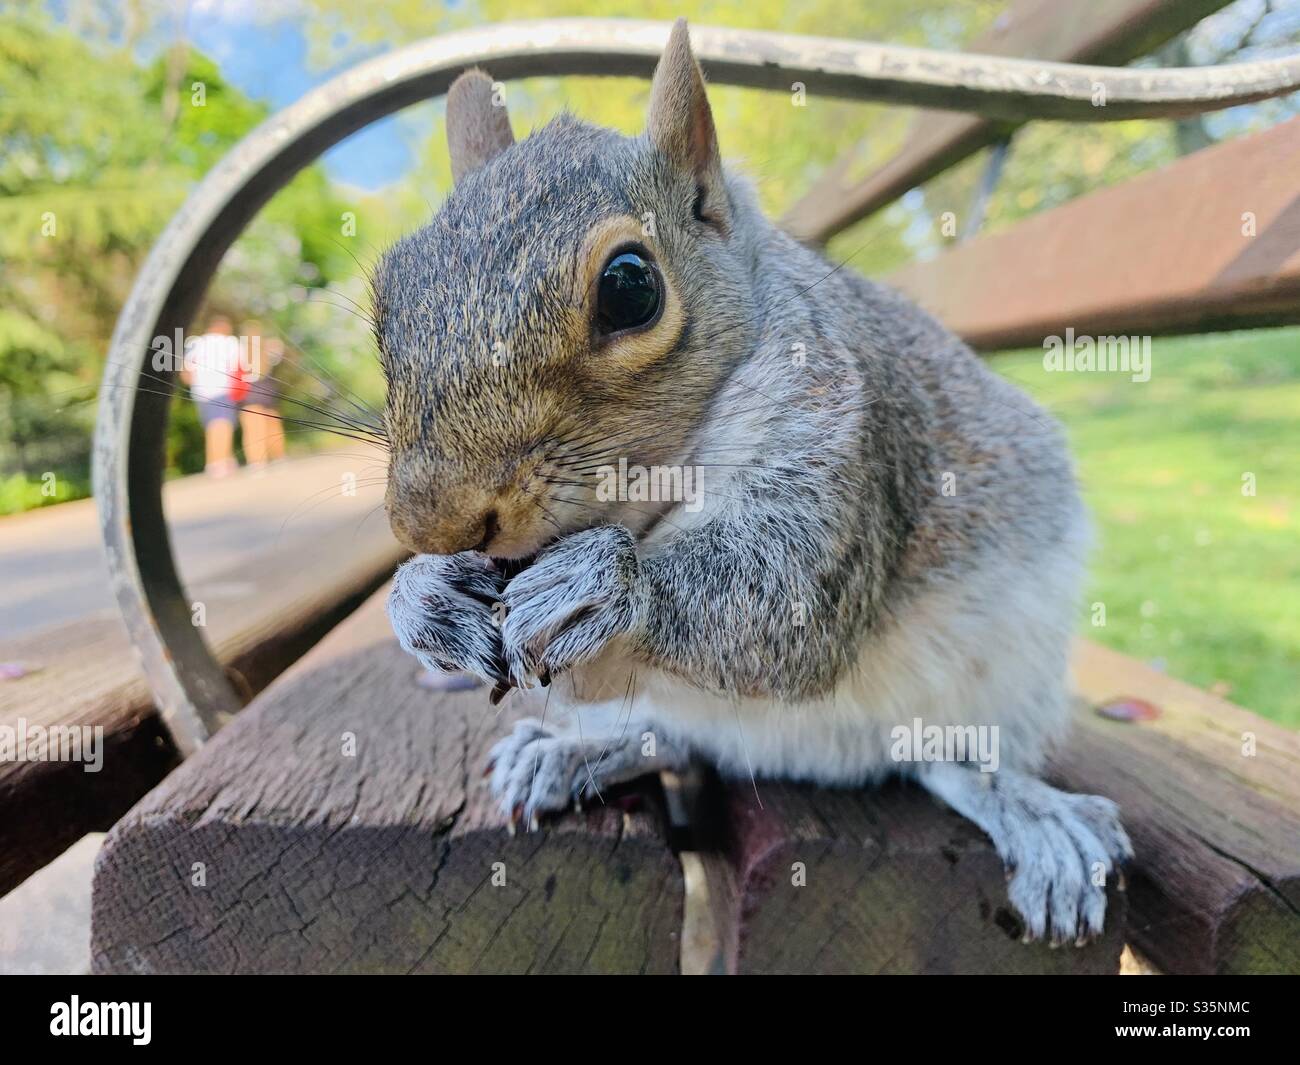 Squirrel eating on park bench Stock Photo